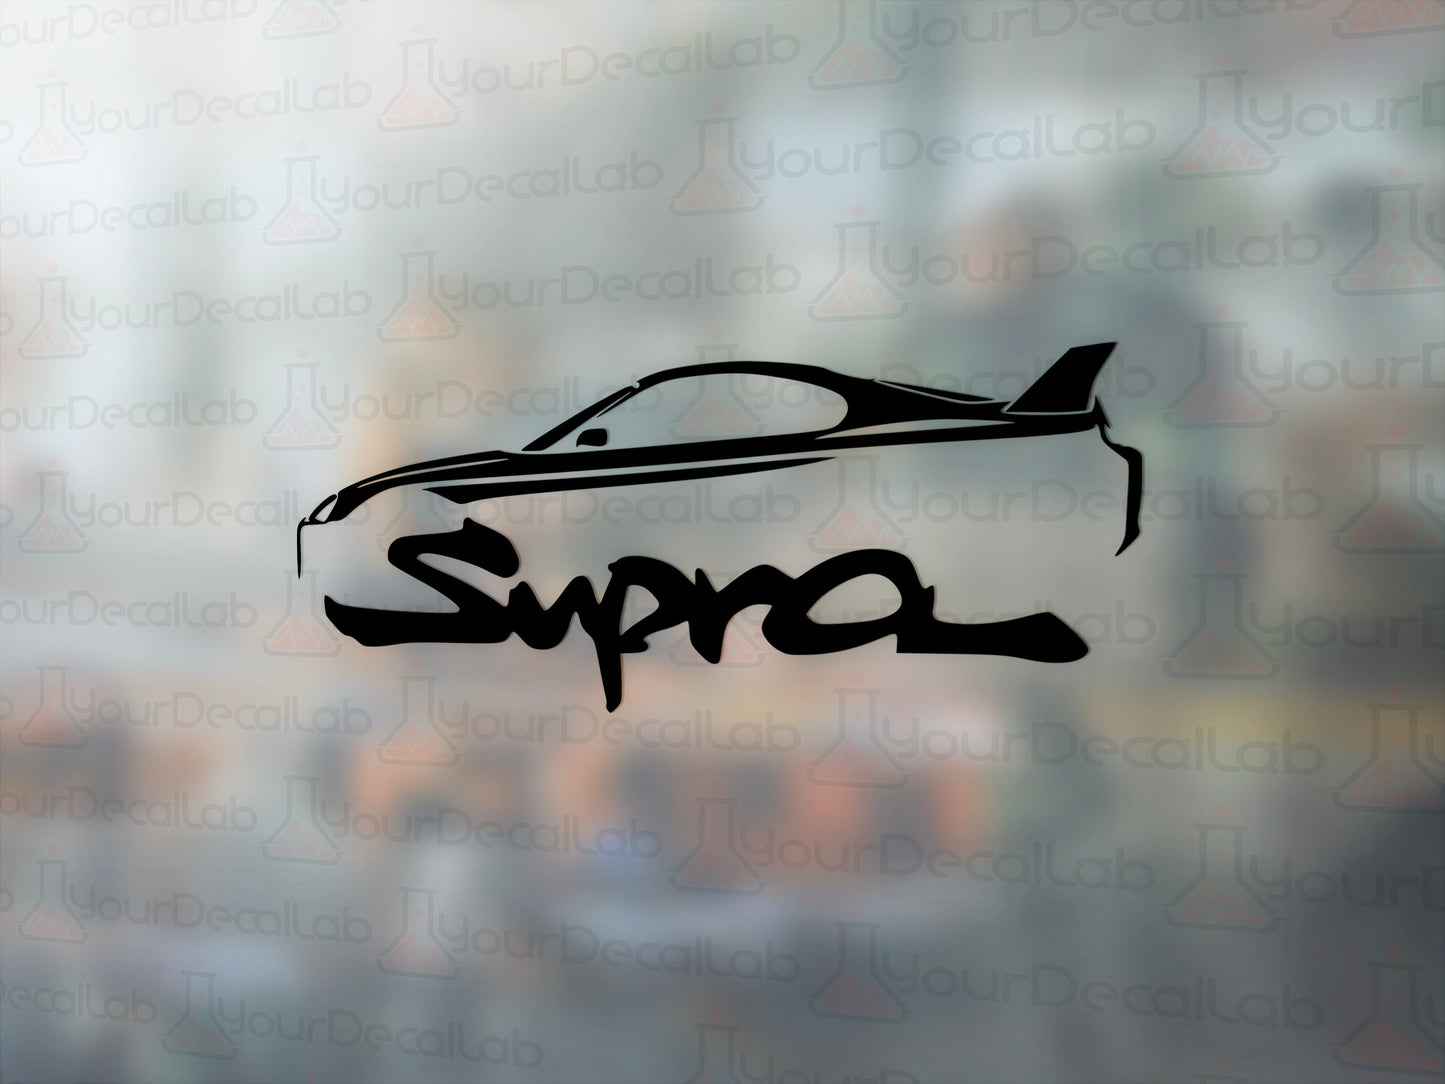 Supra Outline Decal - Many Colors & Sizes